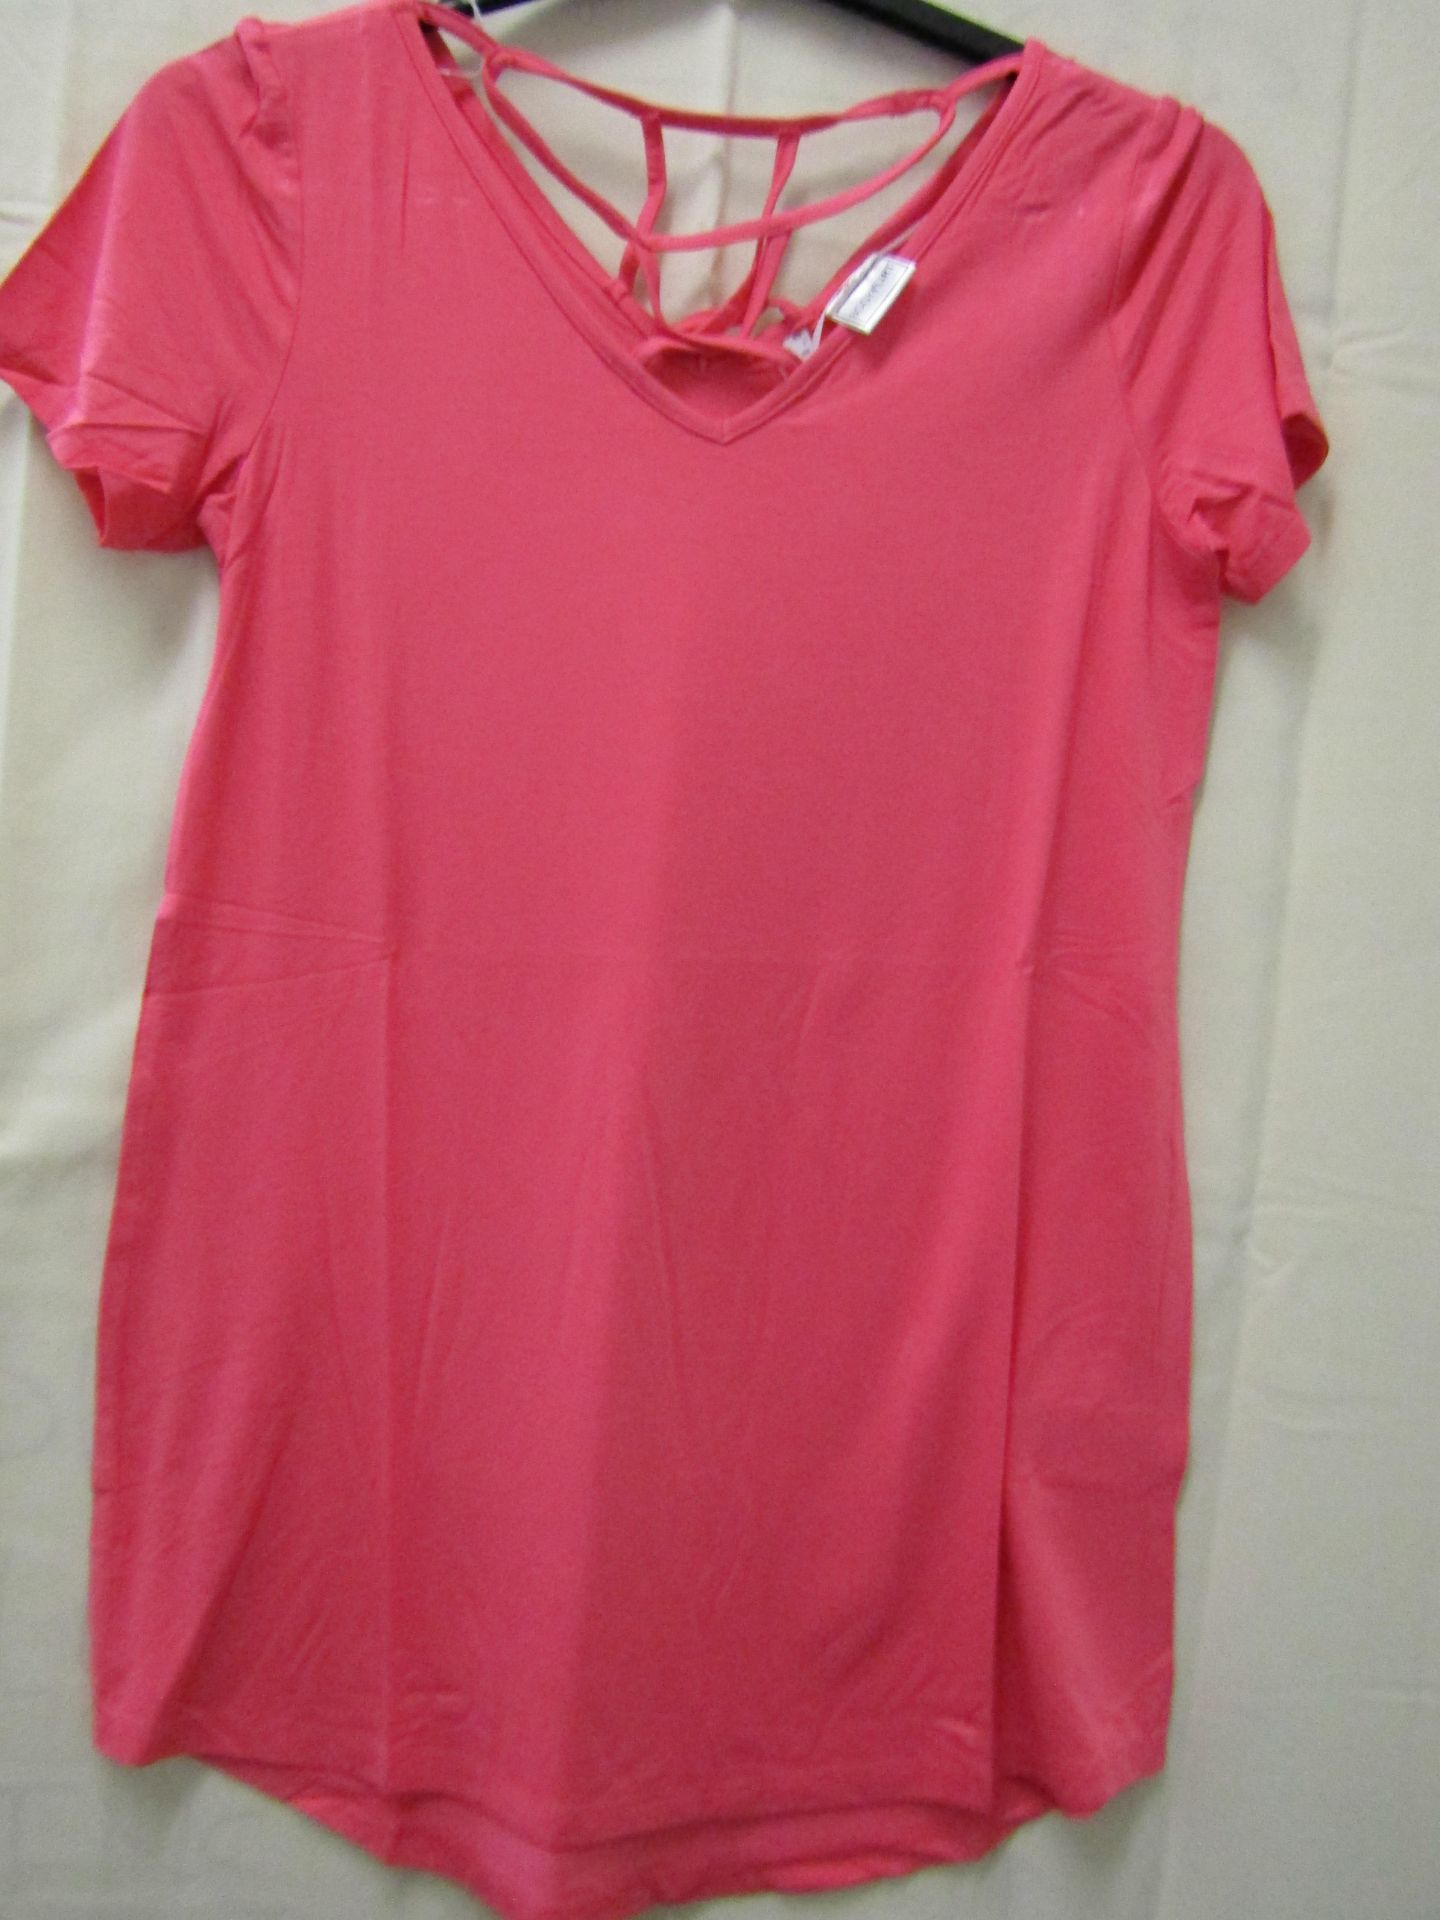 BodyFlirt Top Pink Size S New No Tags